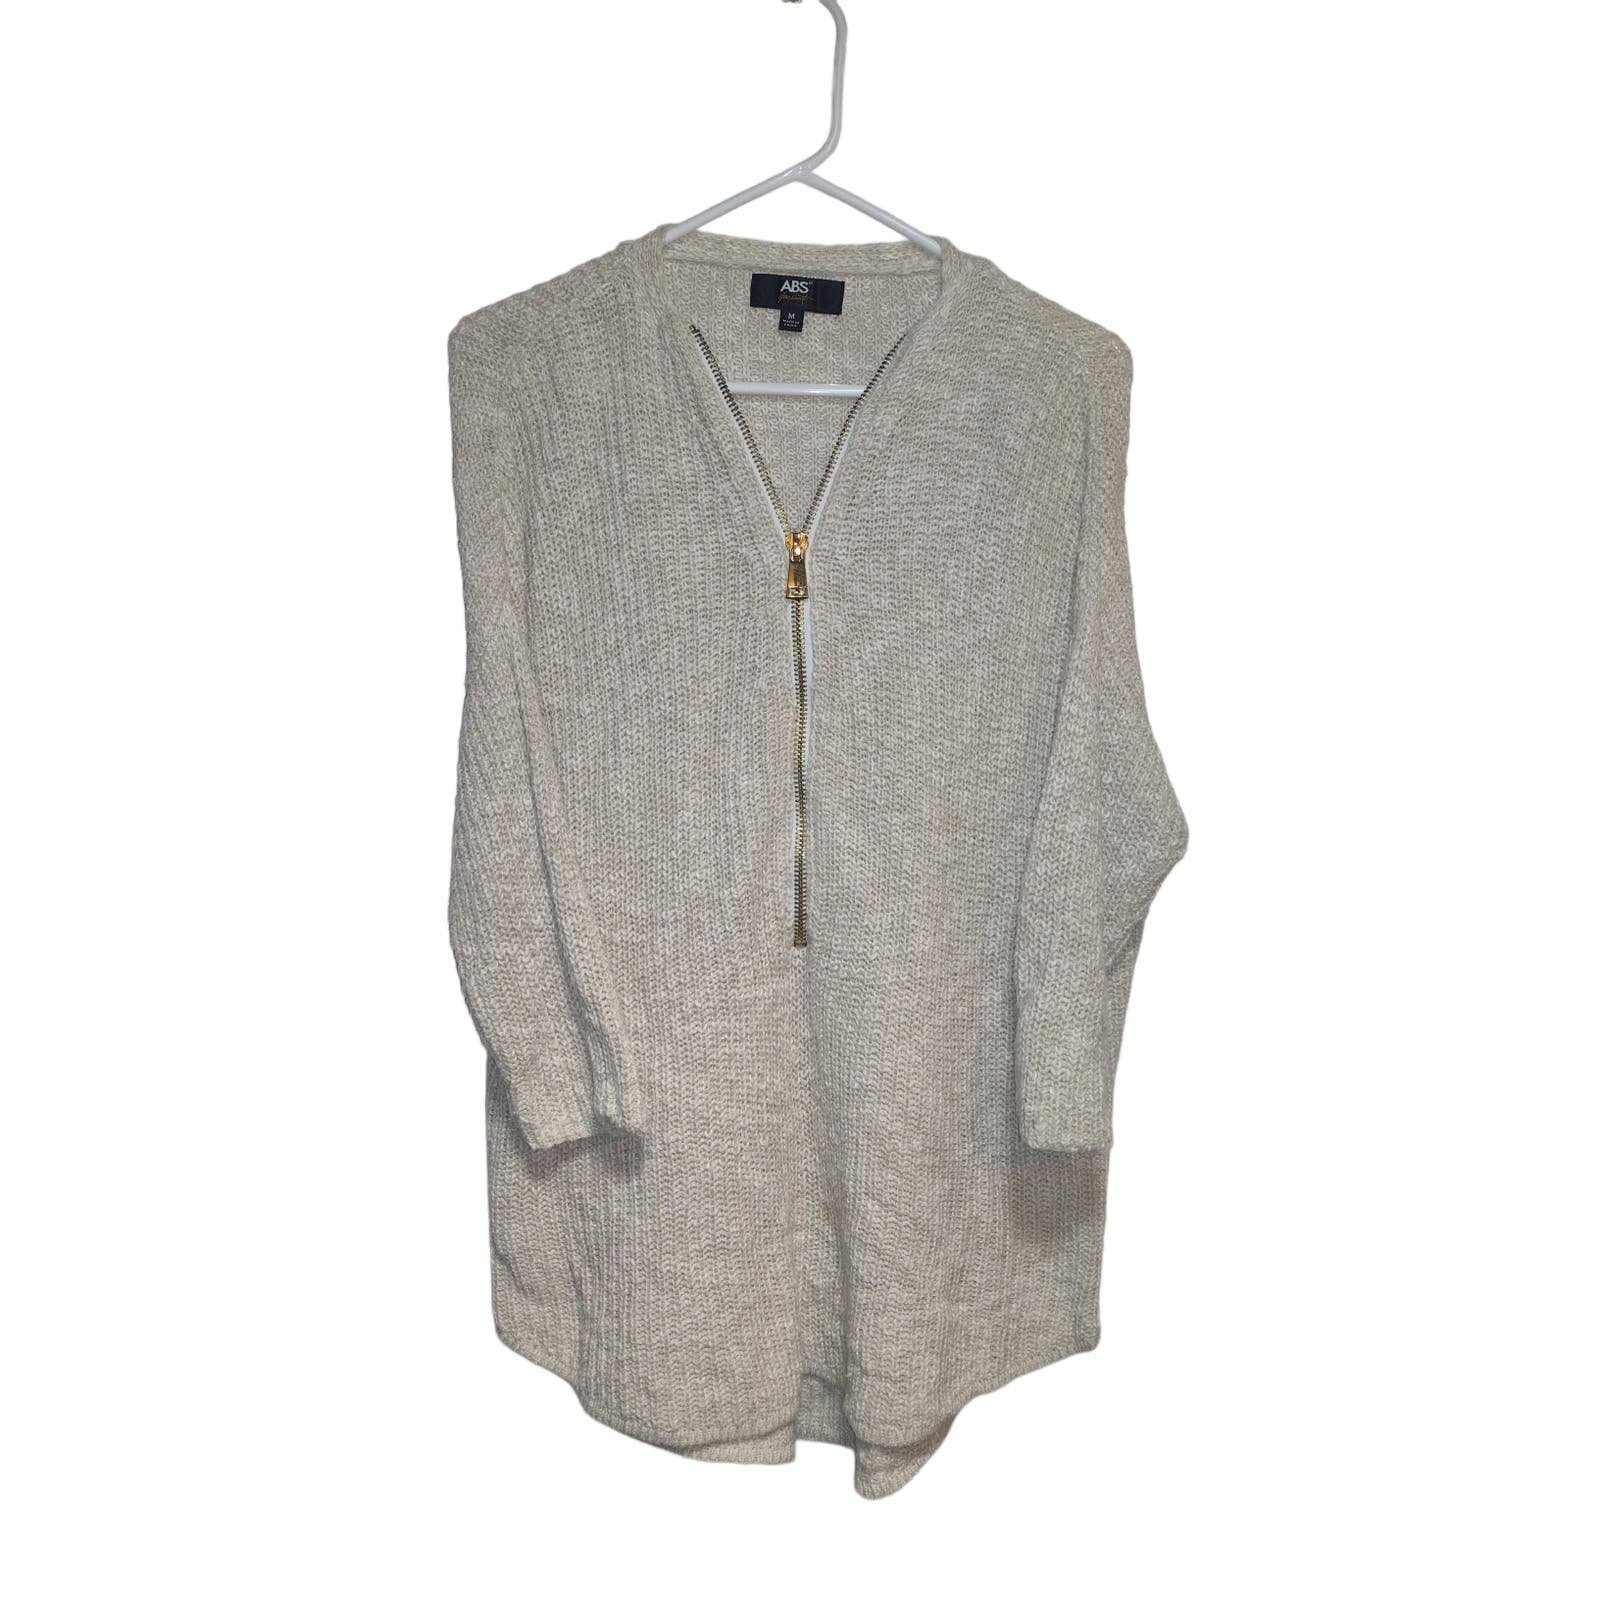 cheapest place to buy  ABS Eileen Fisher Women´s Sweater Size Medium mAfbXjn4e Outlet Store